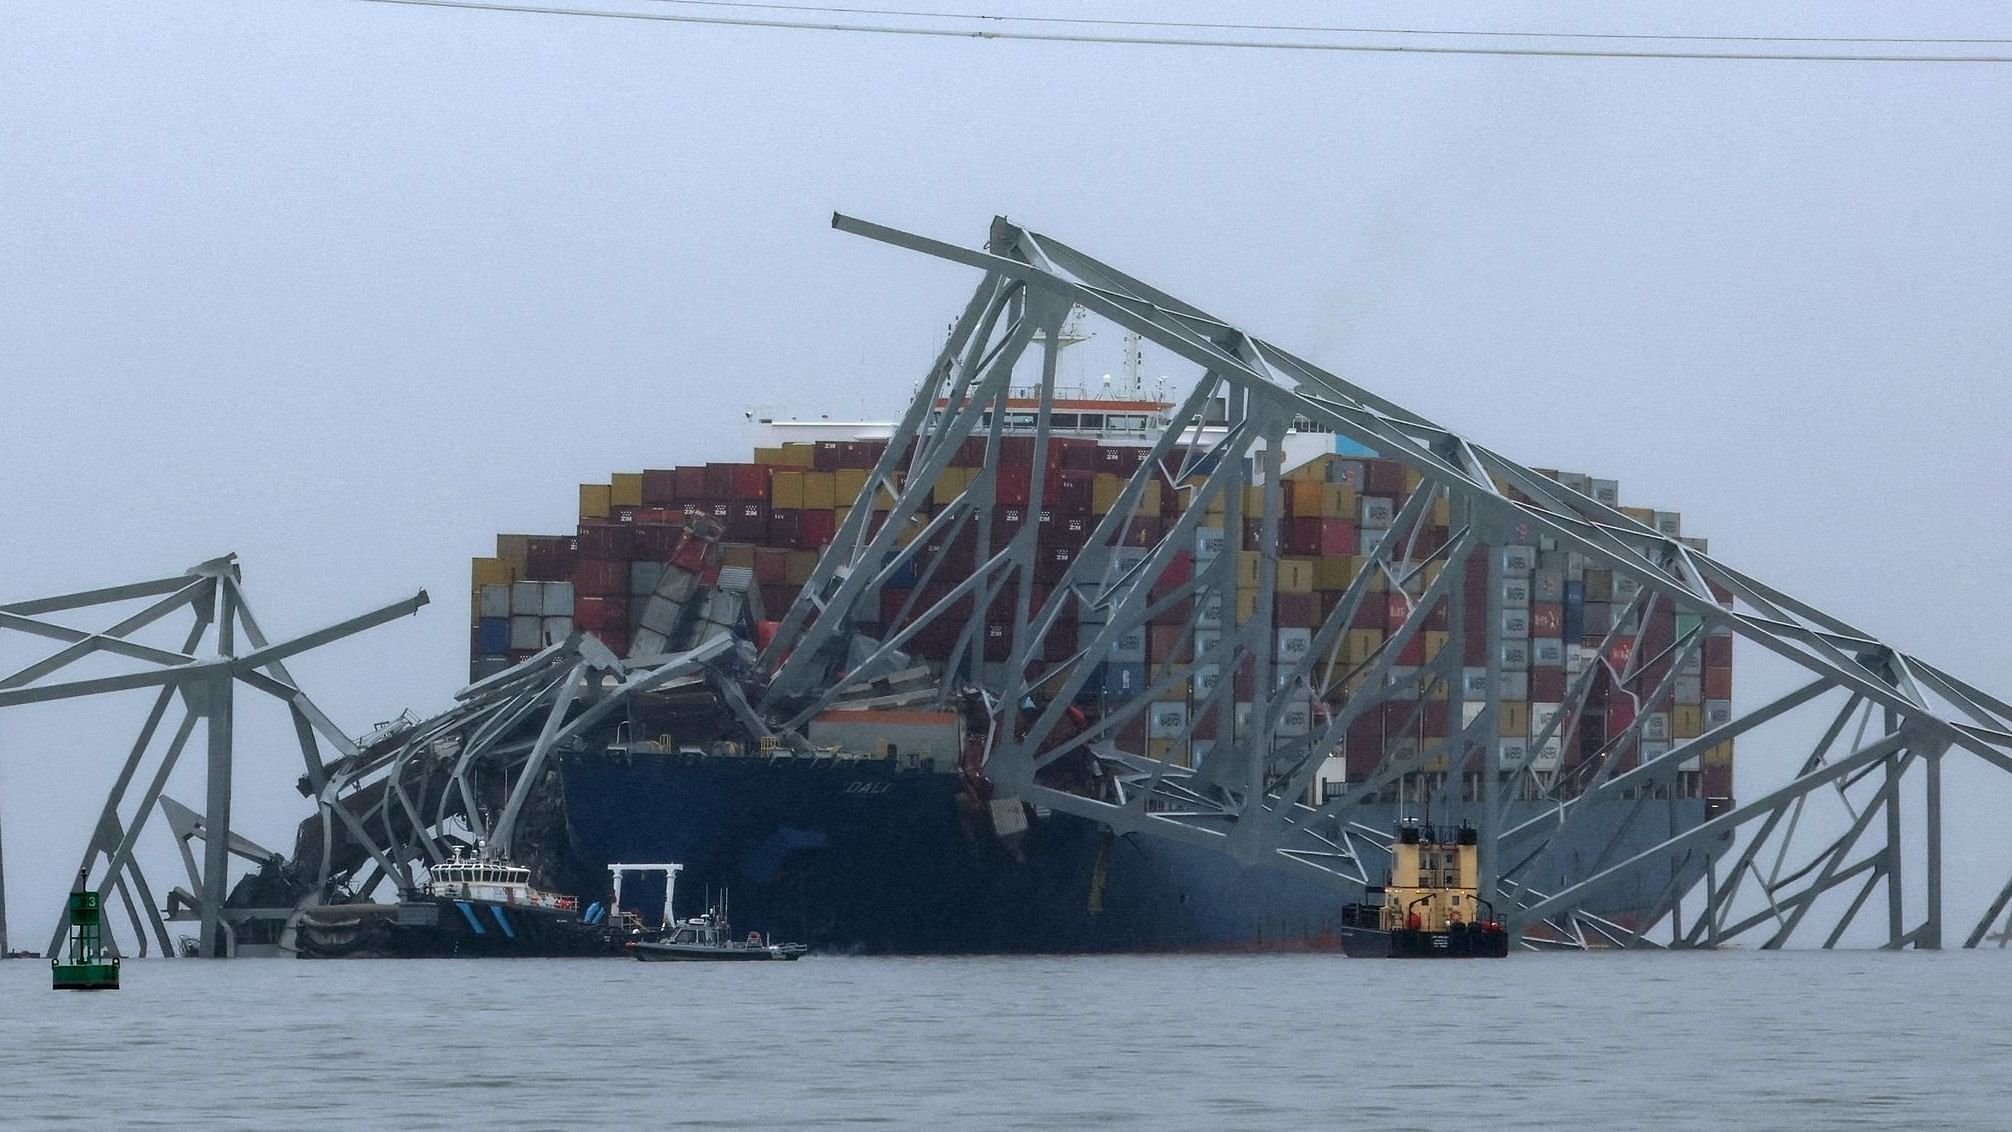 <div class="paragraphs"><p>A view shows the Dali cargo vessel, which crashed into the Francis Scott Key Bridge causing it to collapse, in Baltimore, Maryland, US.</p></div>